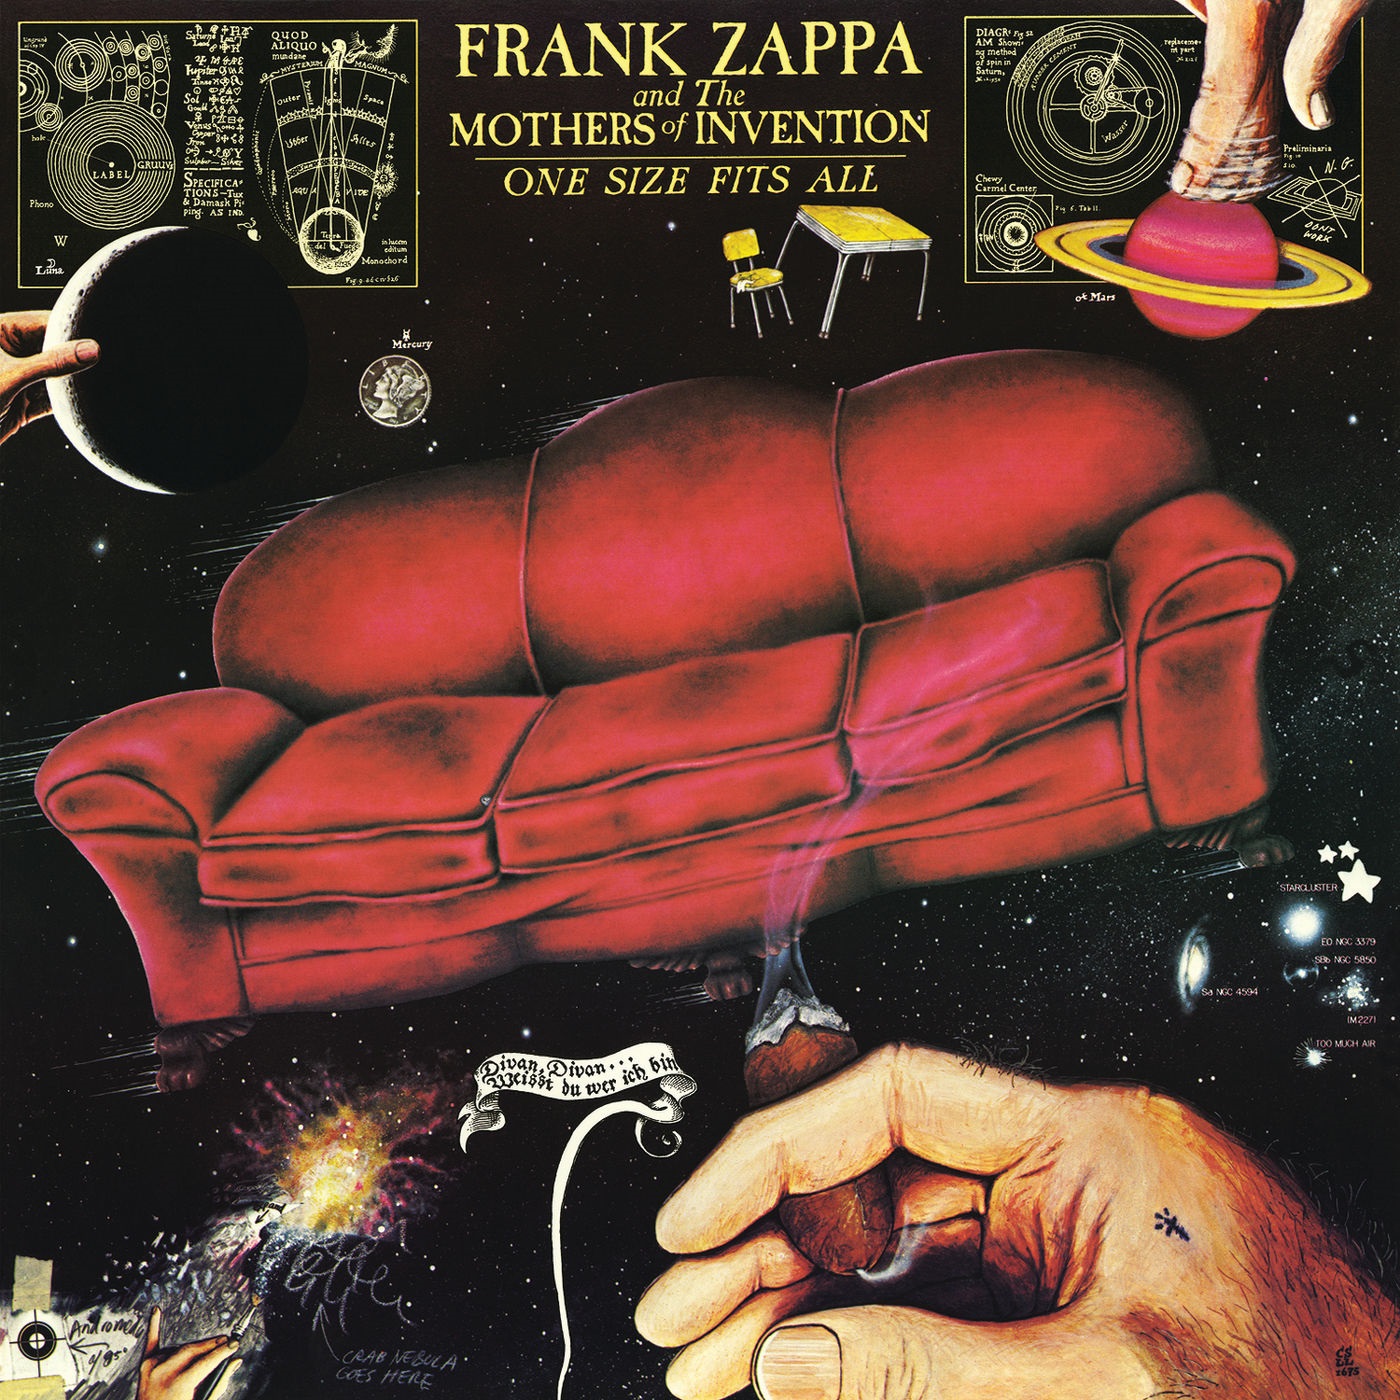 Frank Zappa & The Mothers of Invention – One Size Fits All (1975/2021) [FLAC 24bit/192kHz]